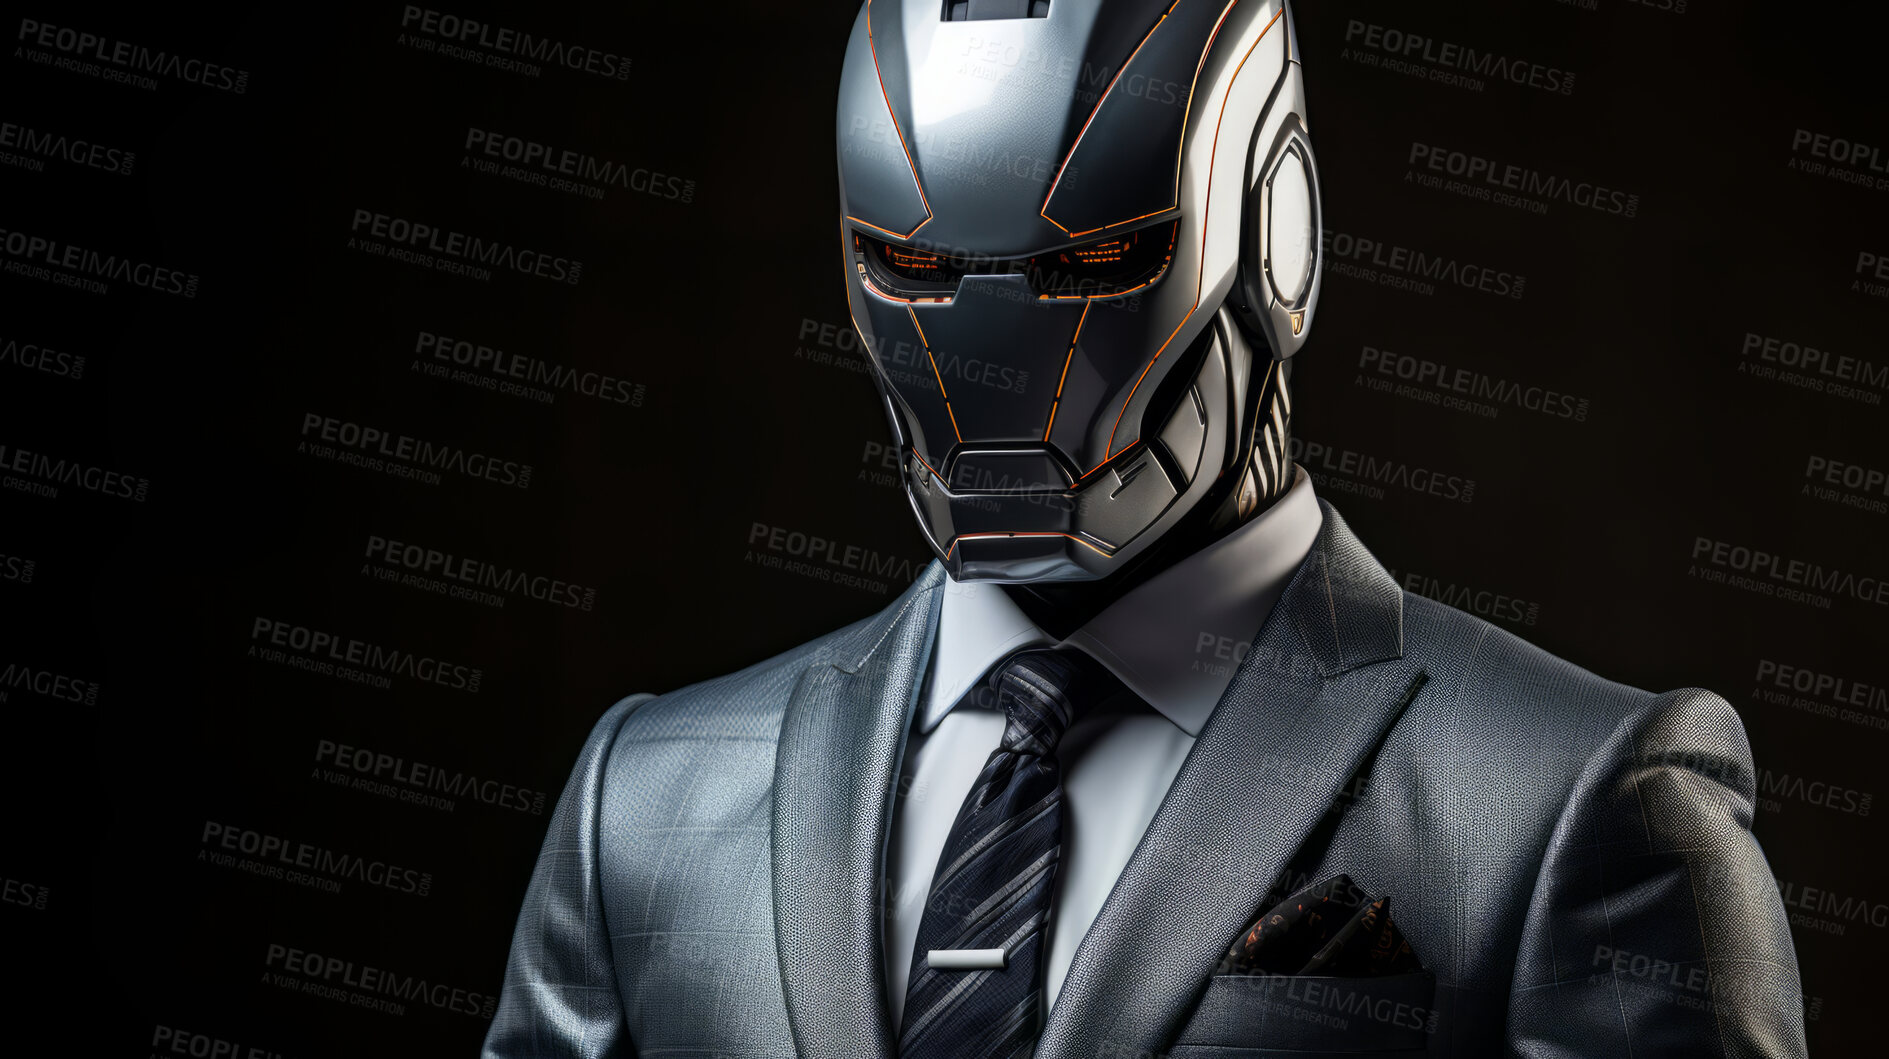 Buy stock photo Futuristic male robot in business suit. Against black backdrop.